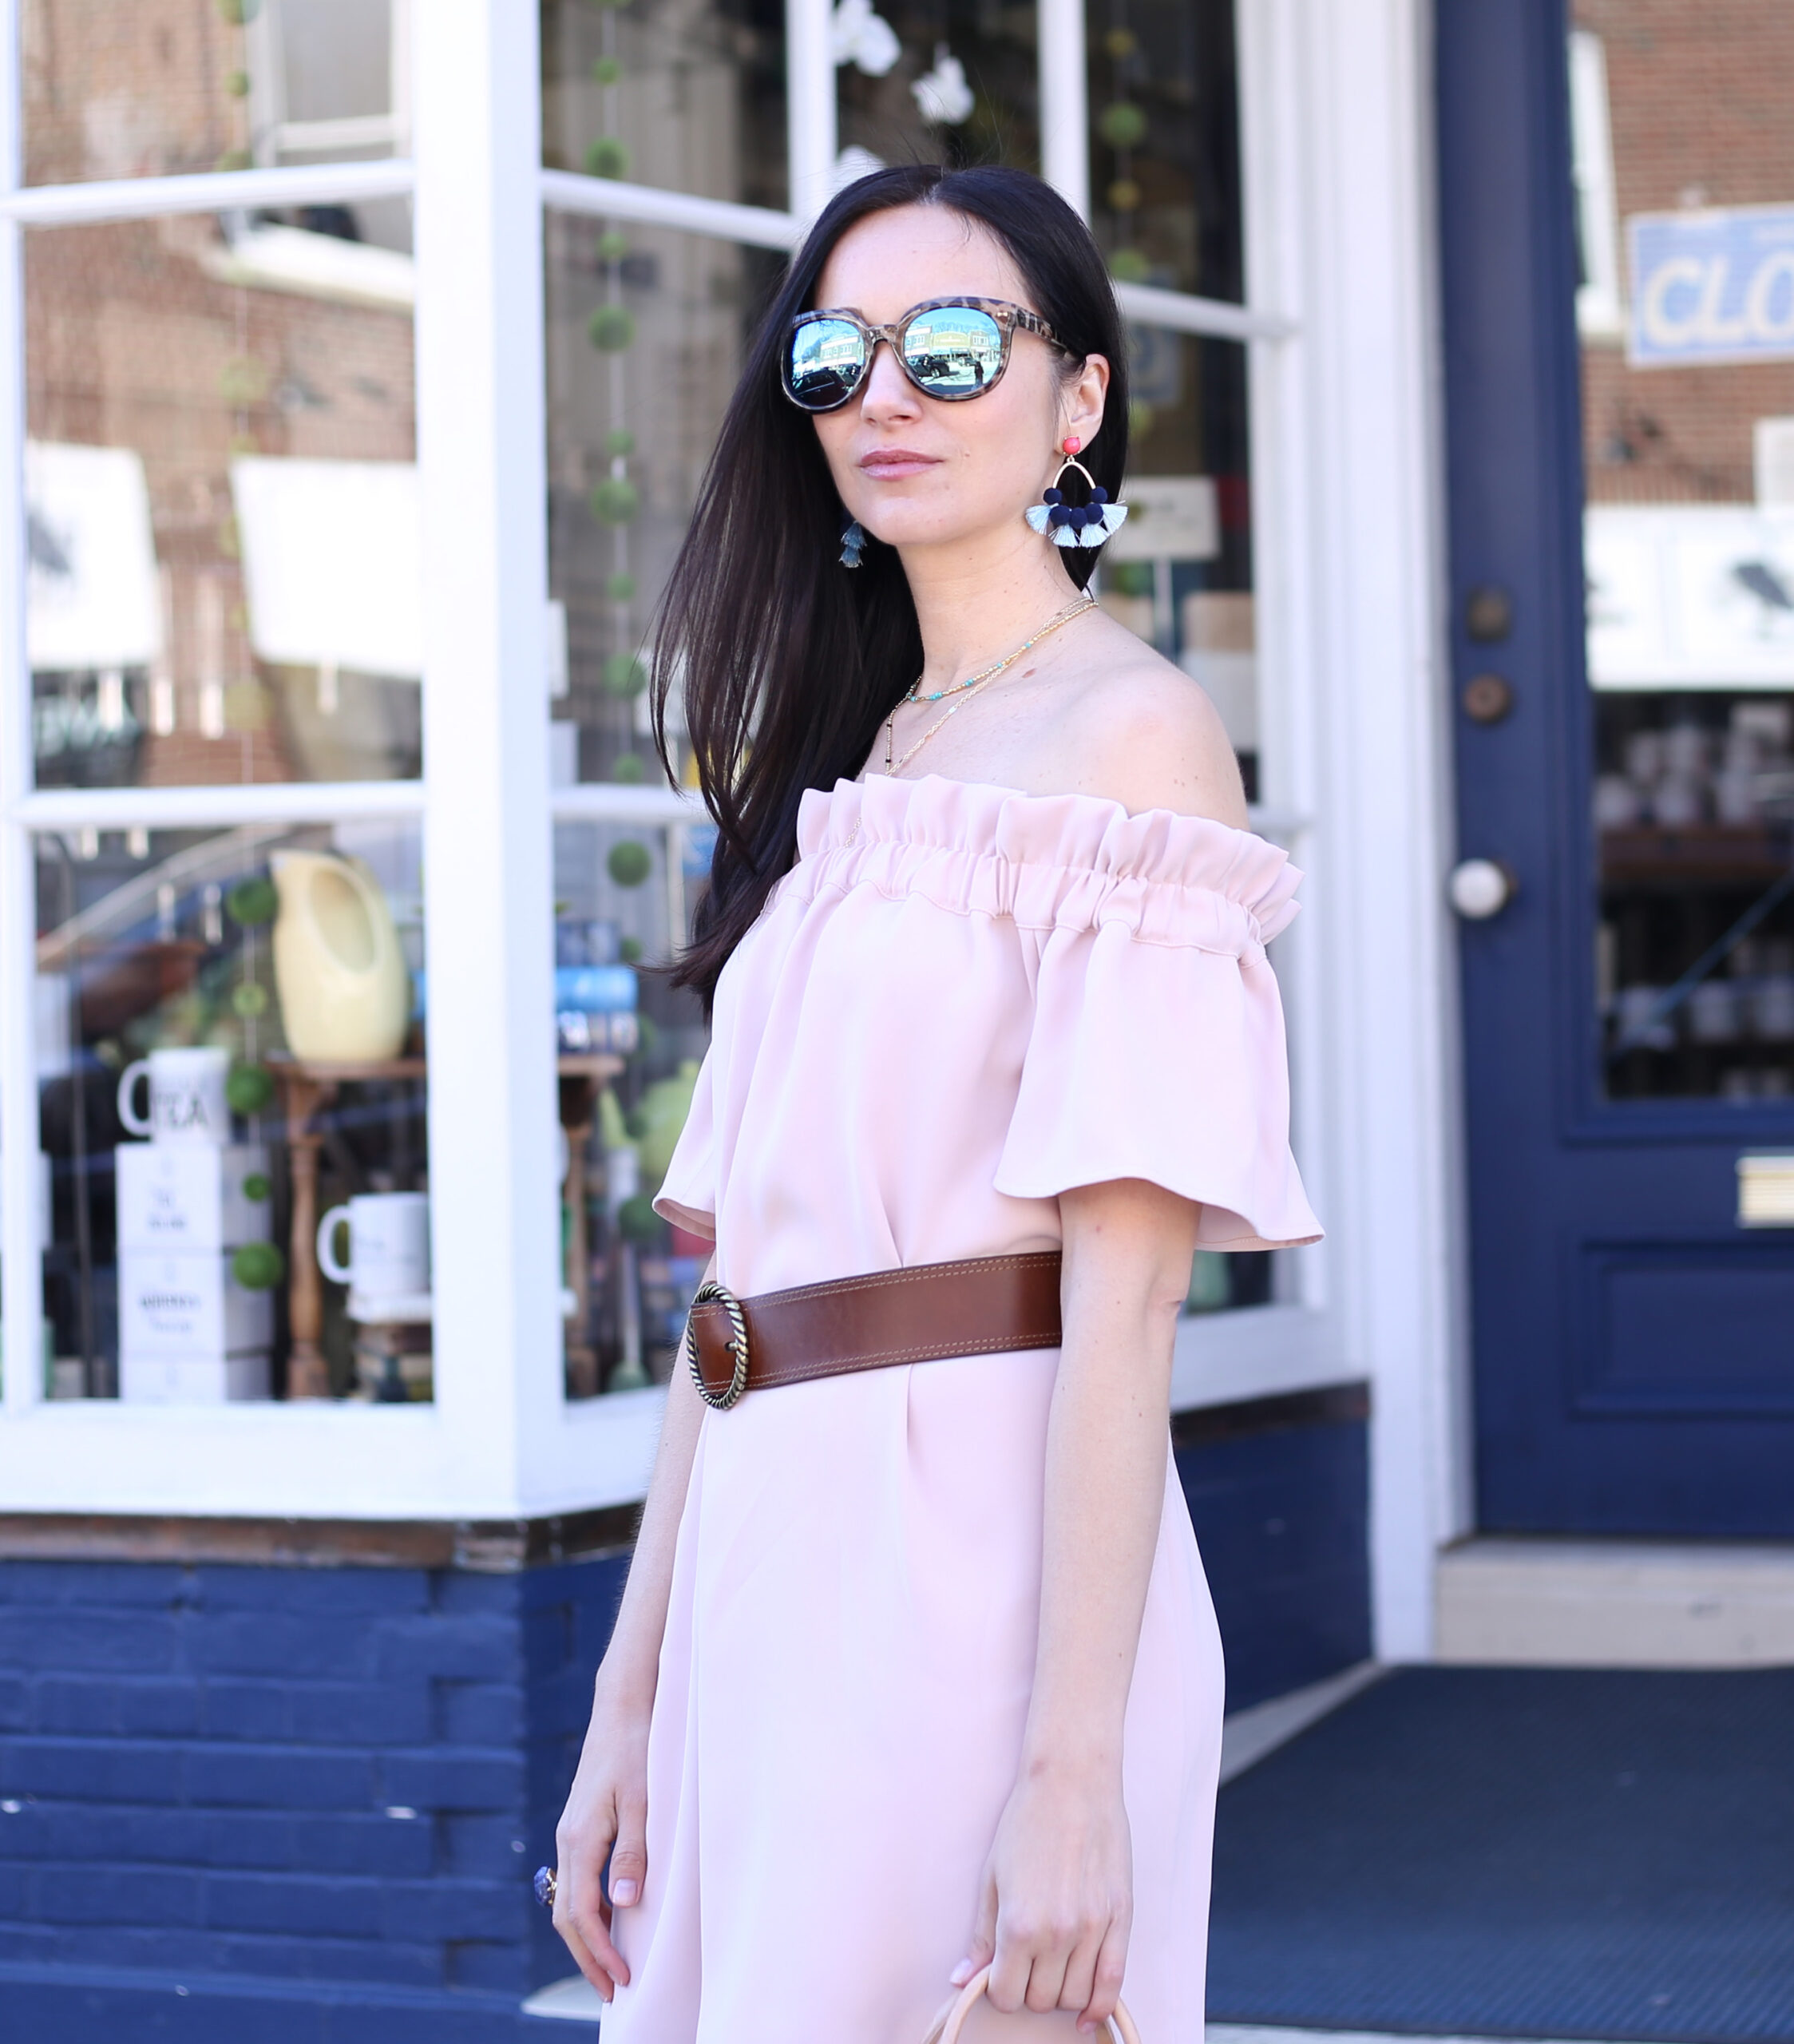 blogger Anna Monteiro of Blushing Rose Style wearing BP. sunglasses from Nordstrom